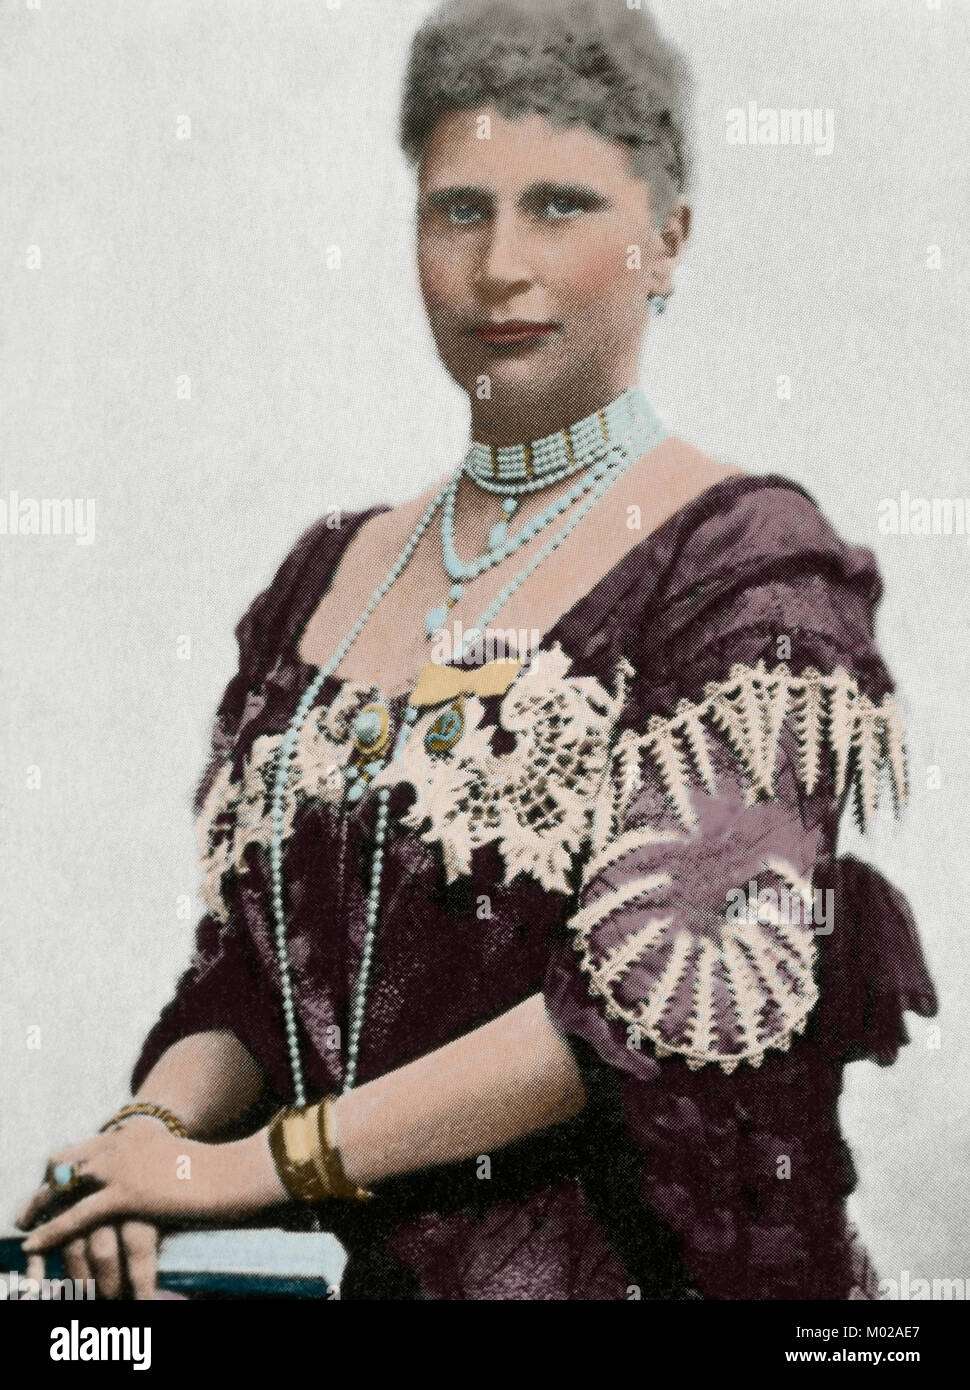 Louise of Sweden (1851-1926). Queen of Denmark as the wife of King Frederick VIII. Portrait. Photography. Colored. Stock Photo